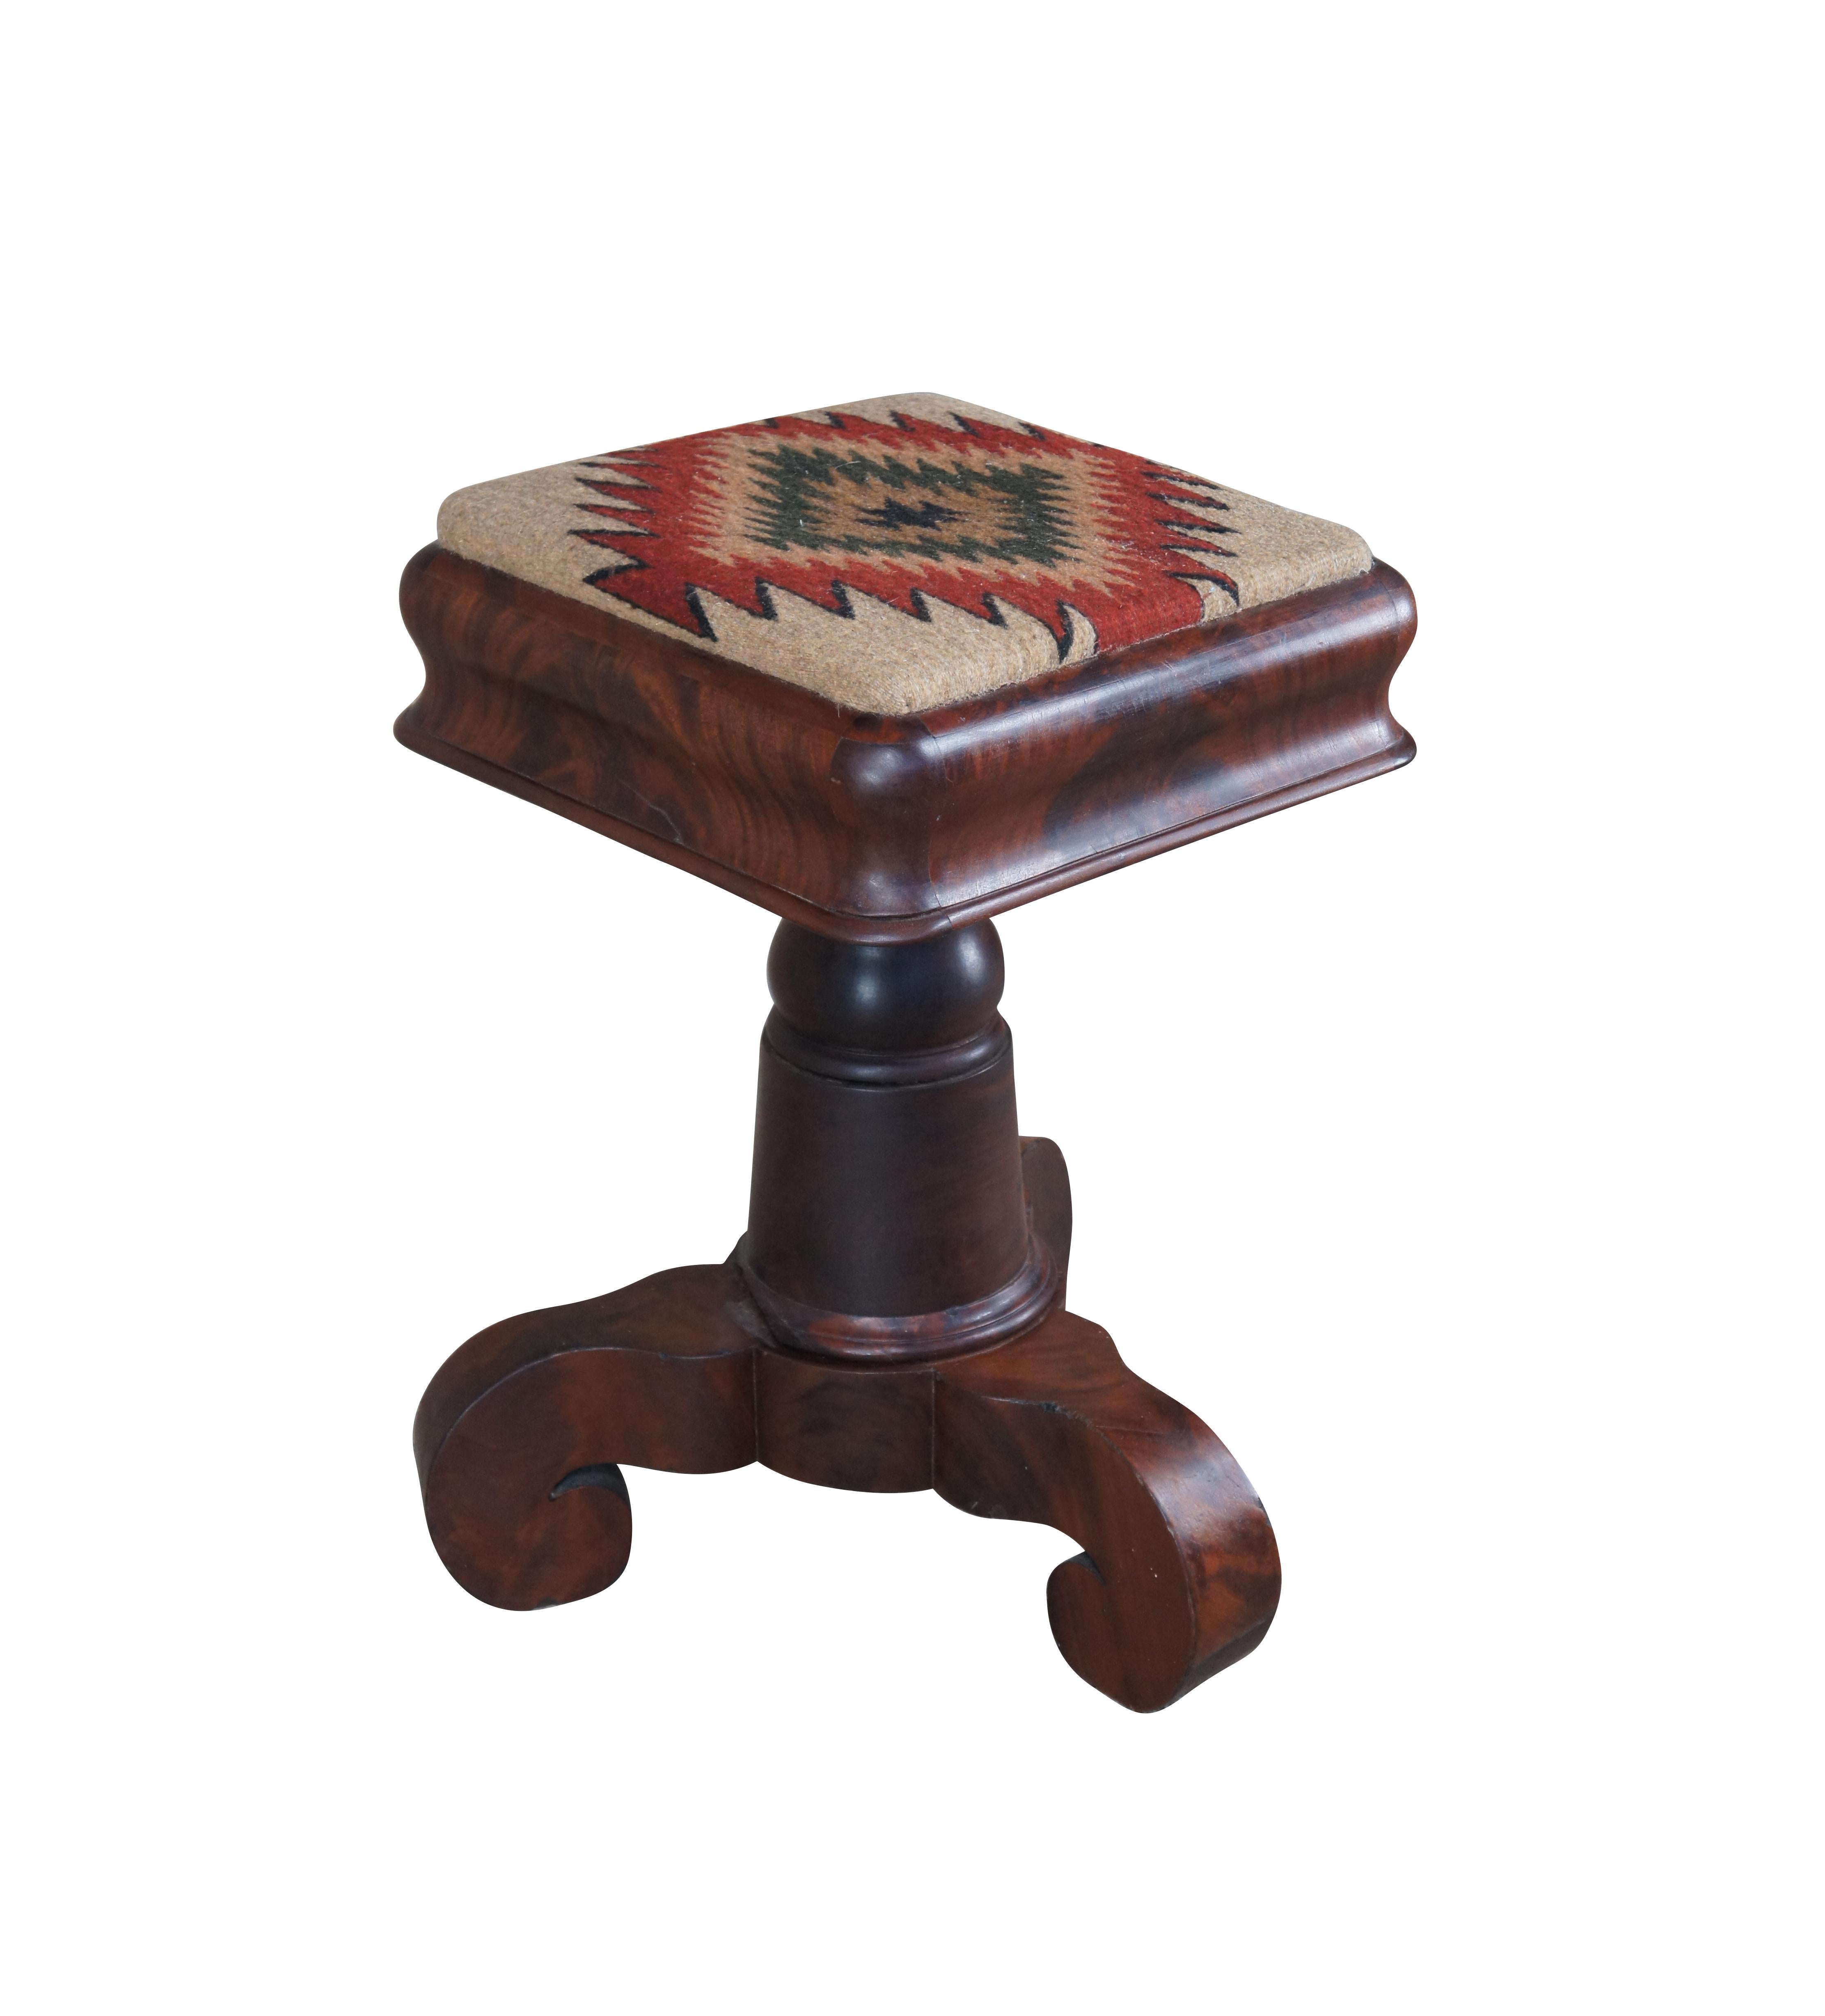 A spectacular Piano or Organ stool from the American Empire period, circa 1840s. Feature a mahogany frame with crotch mahogany (burled) veneer. The square frame seat features a Southwestern Kilim upholstered seat and is supported by a graduated